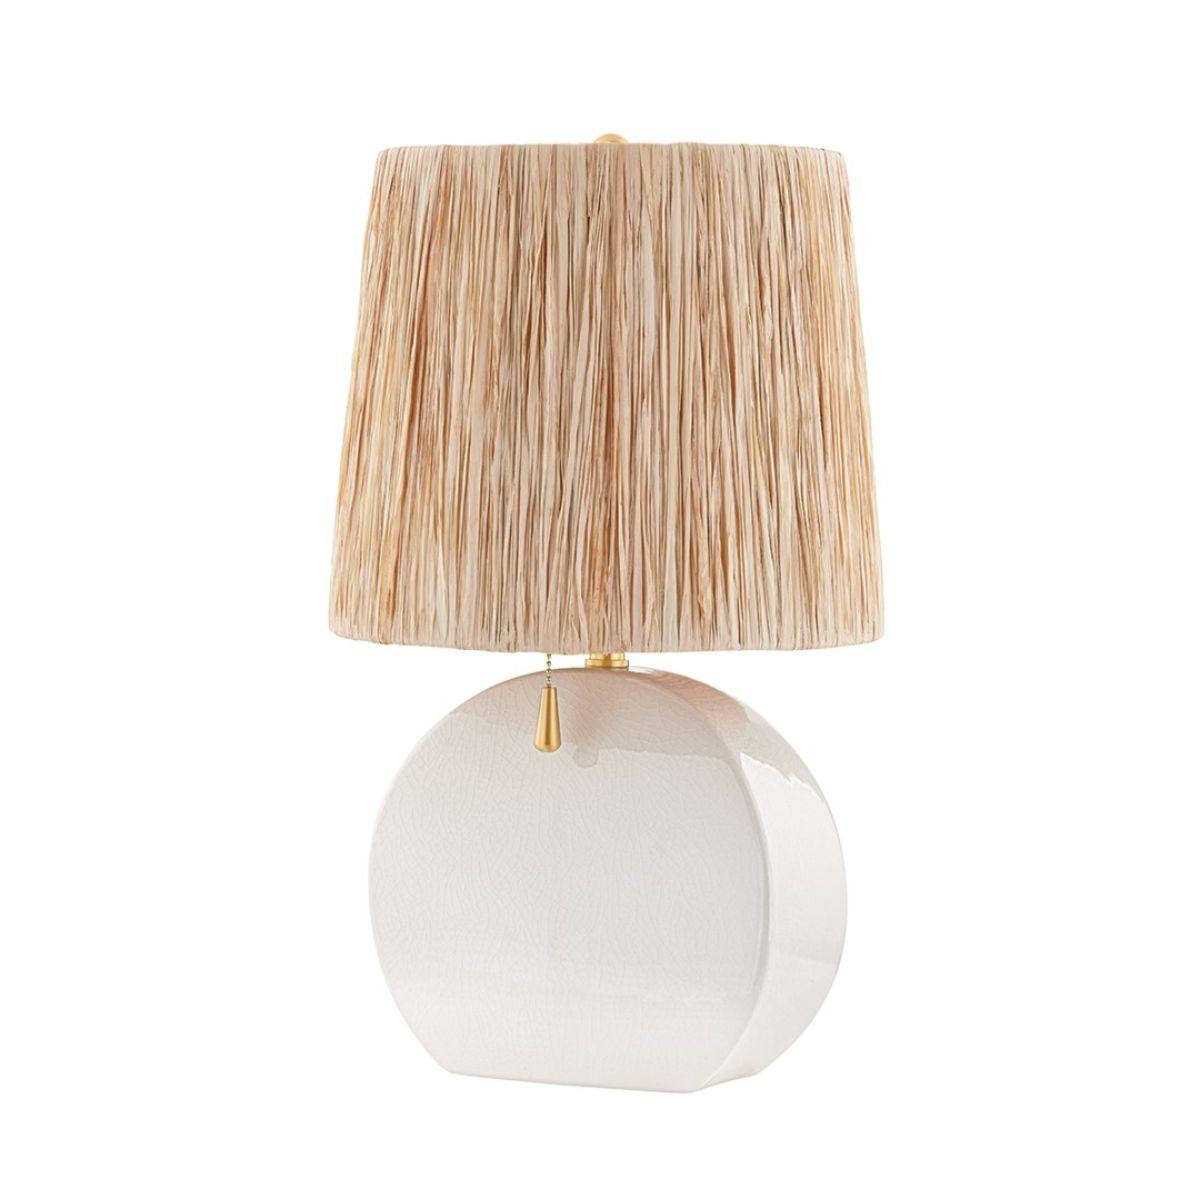 Aneesa Table Lamp Ceramic Ivory Crackle with Aged Brass Accents